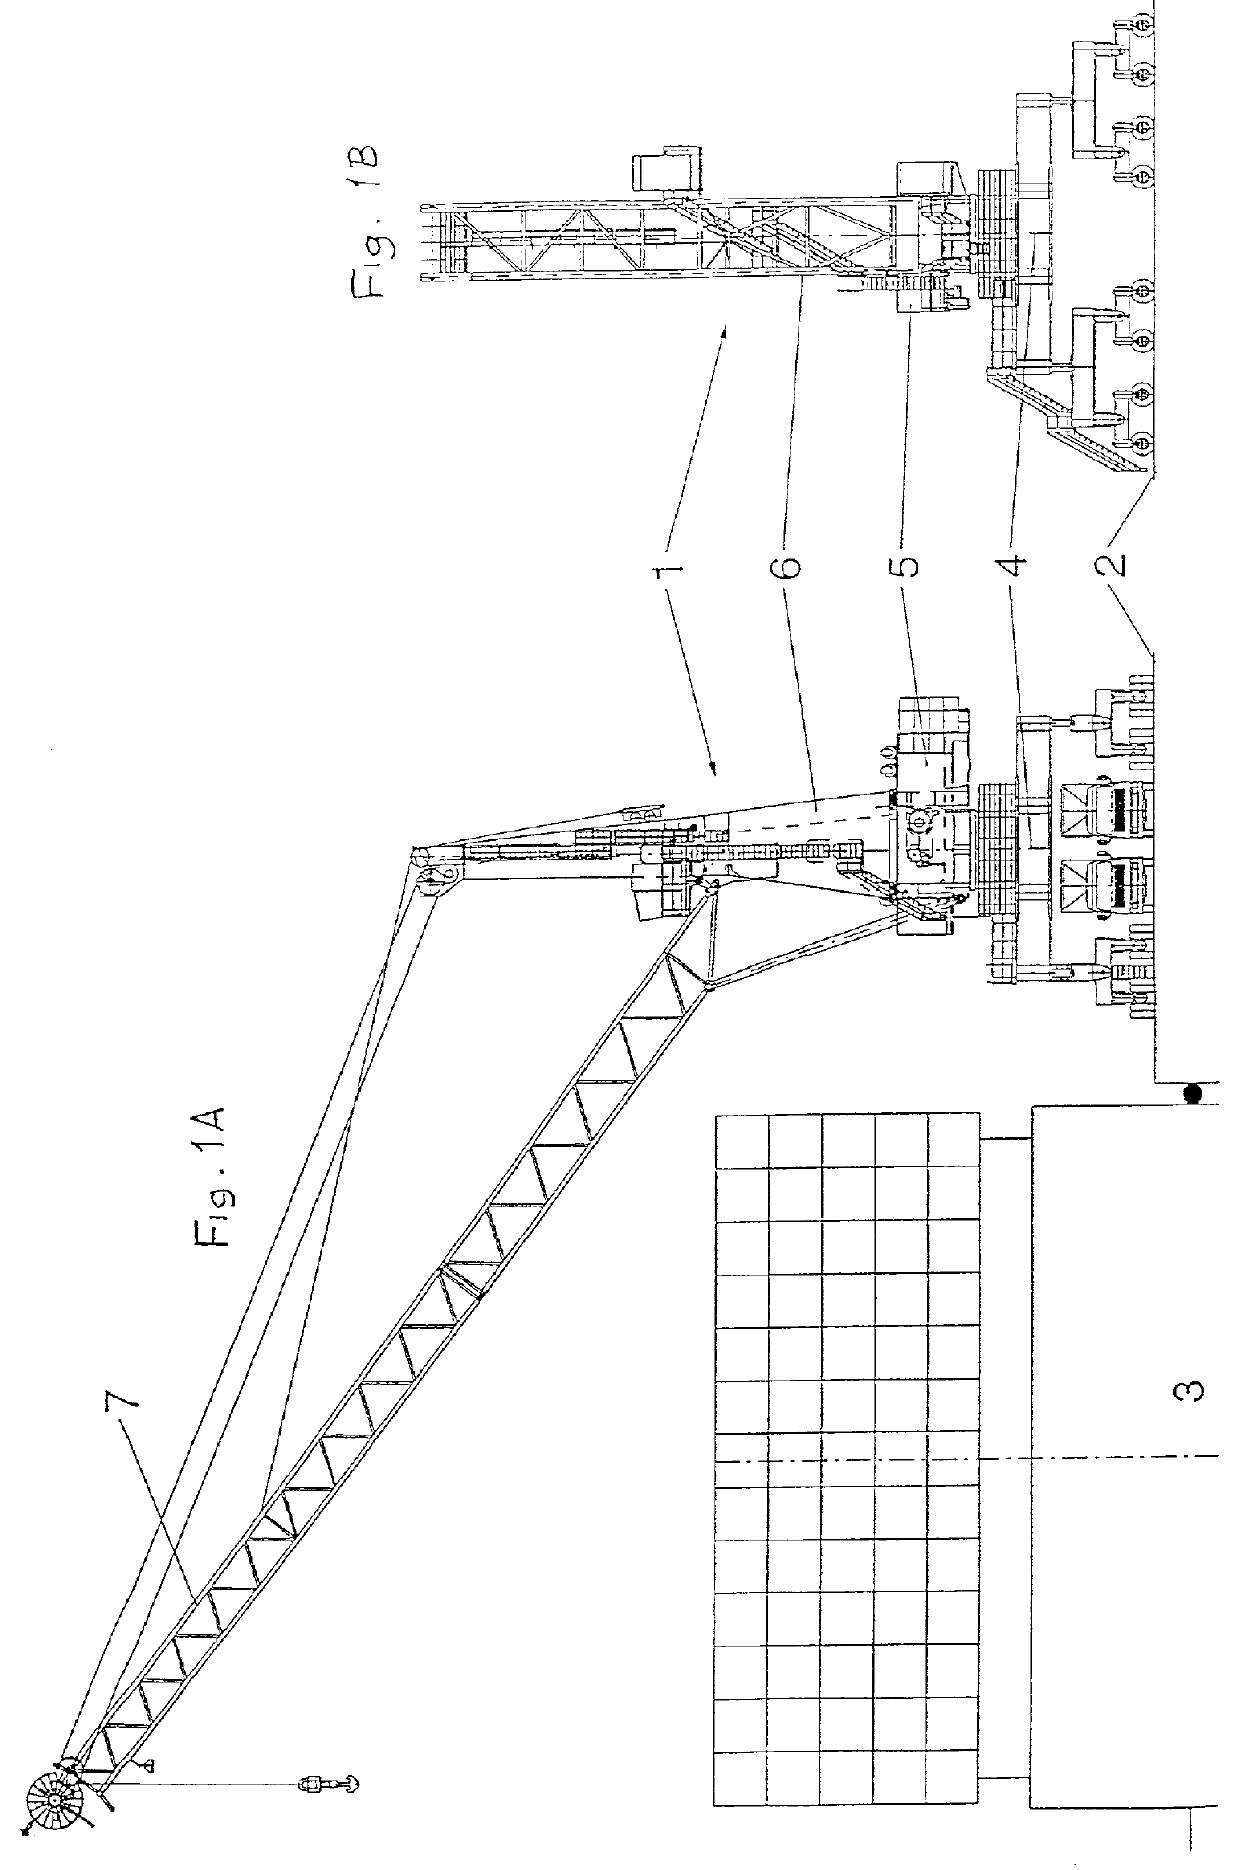 Mobile harbor crane for the combined handling of containers and bulk materials